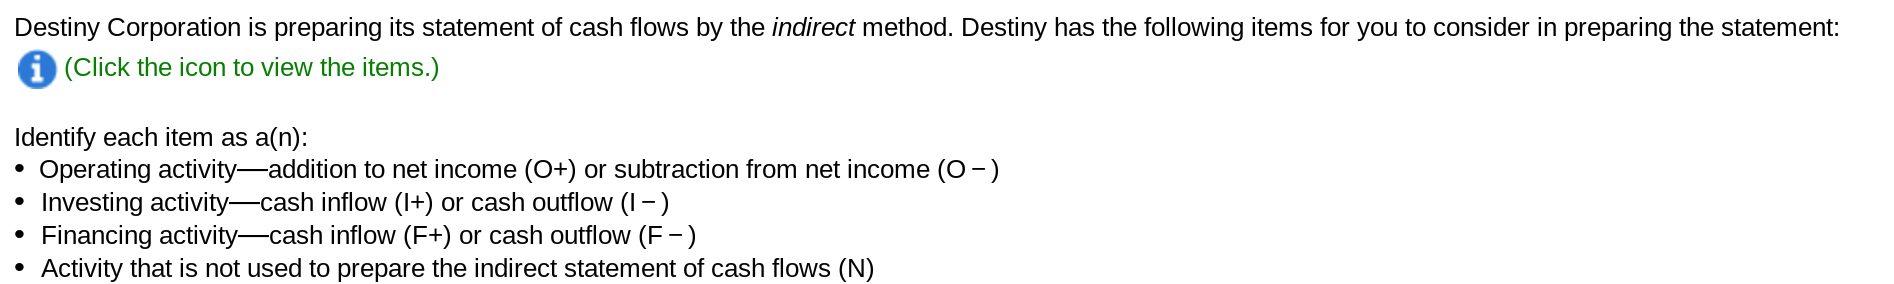 Destiny Corporation is preparing its statement of cash flows by the indirect method. Destiny has the following items for you to consider in preparing the statement:
(Click the icon to view the items.)
Identify each item as a(n):
Operating activity-addition to net income (O+) or subtraction from net income (O-)
Investing activity-cash inflow (I+) or cash outflow (I-)
Financing activity-cash inflow (F+) or cash outflow (F -)
Activity that is not used to prepare the indirect statement of cash flows (N)
